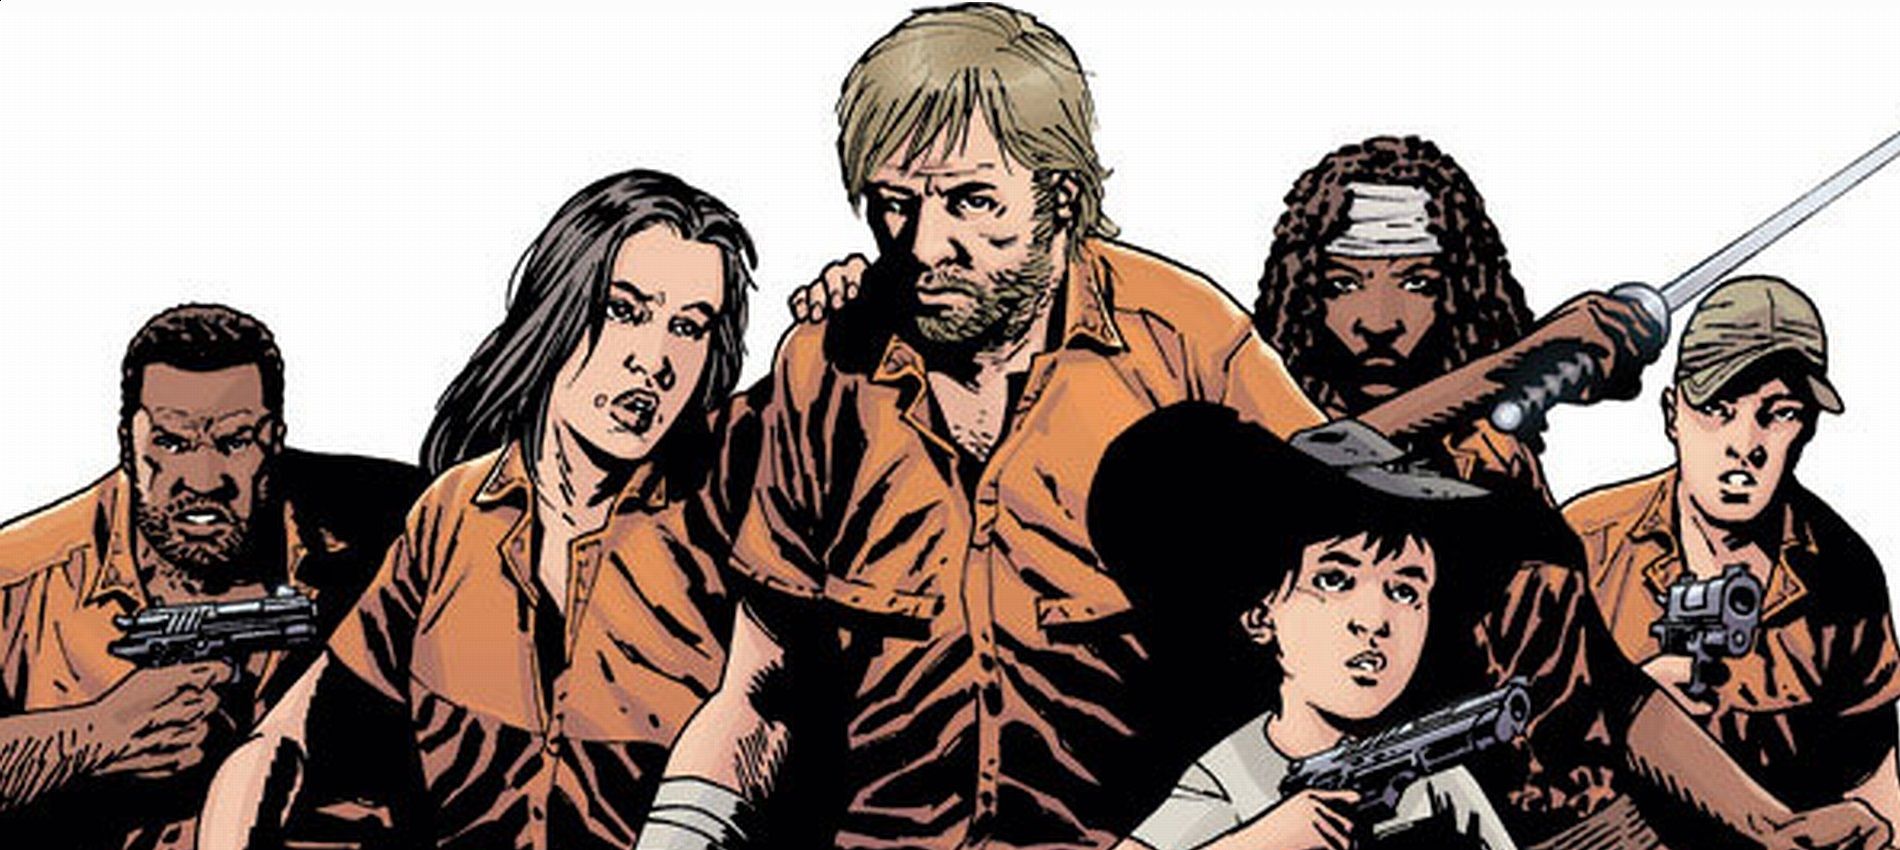 The comic book cast from The Walking Dead stands